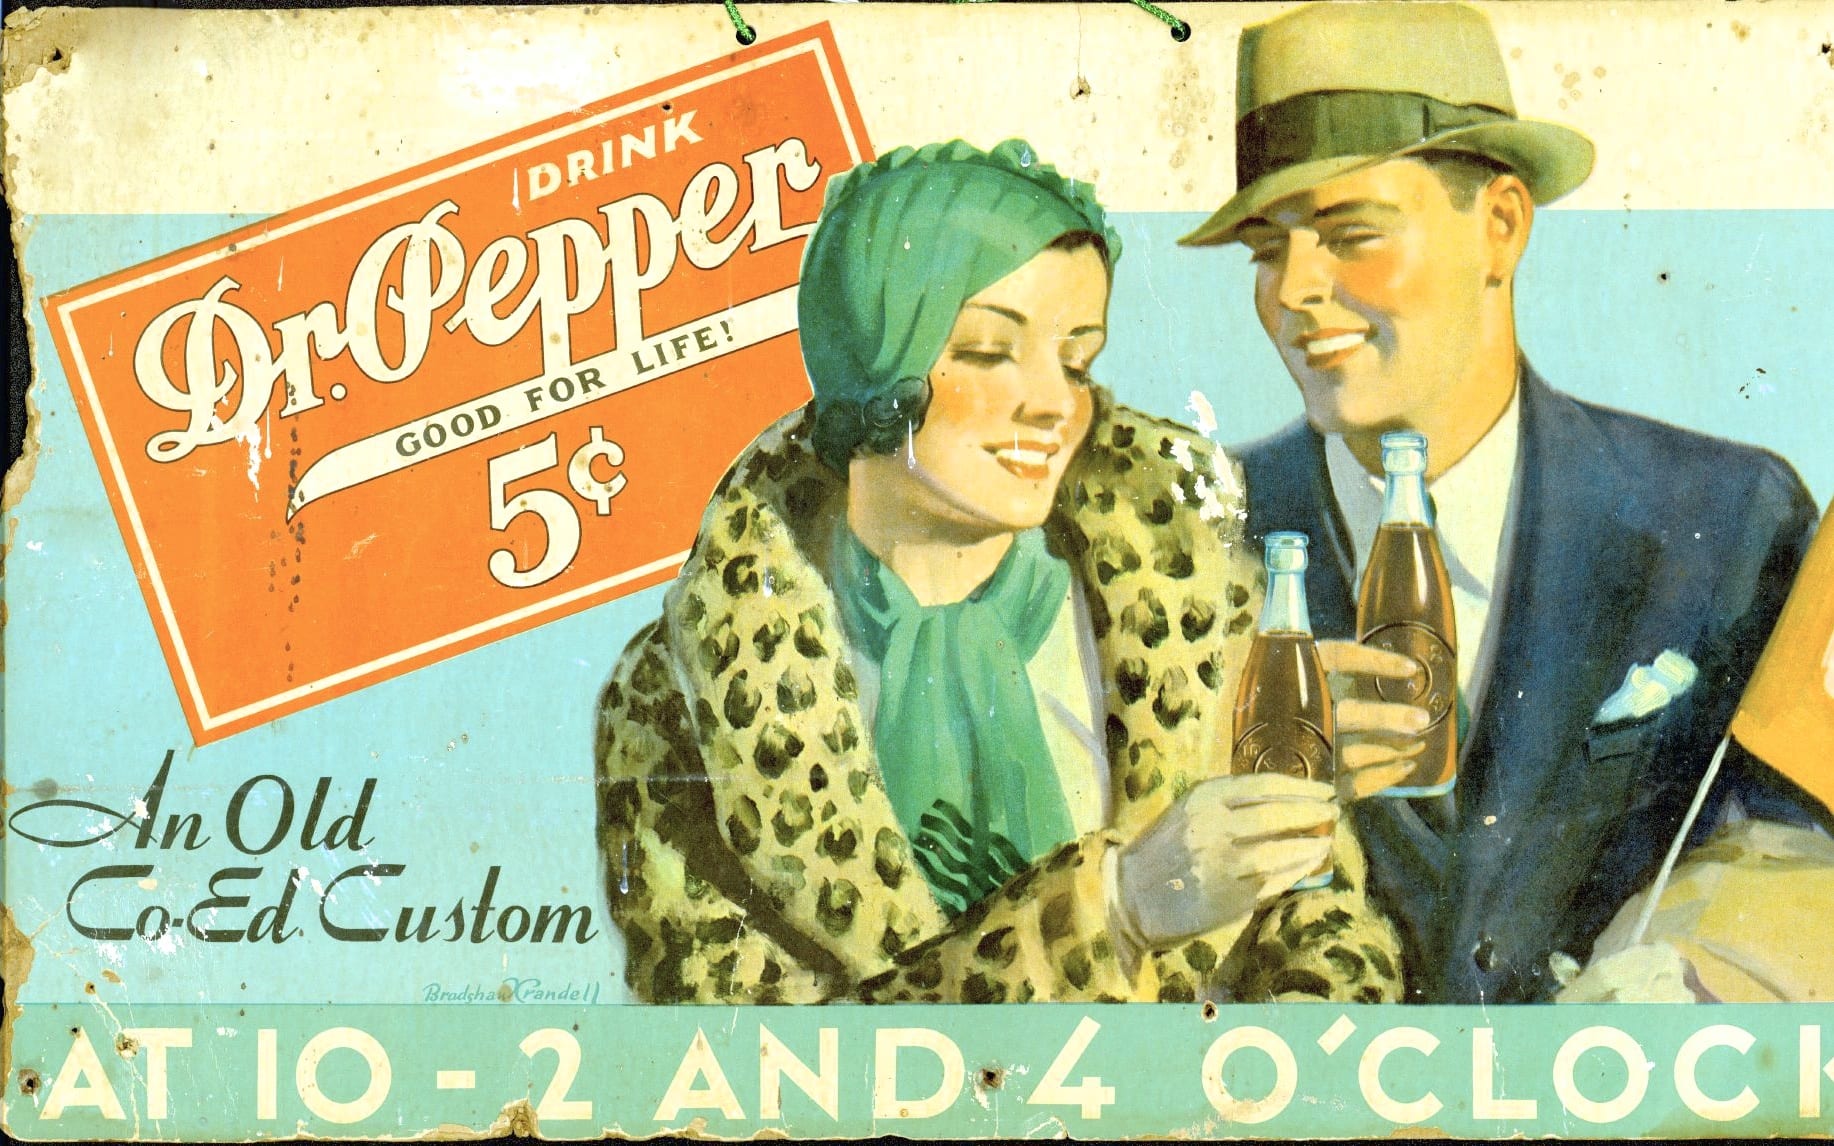 Dr Pepper Good for Life Ad - The Antique Advertising Expert